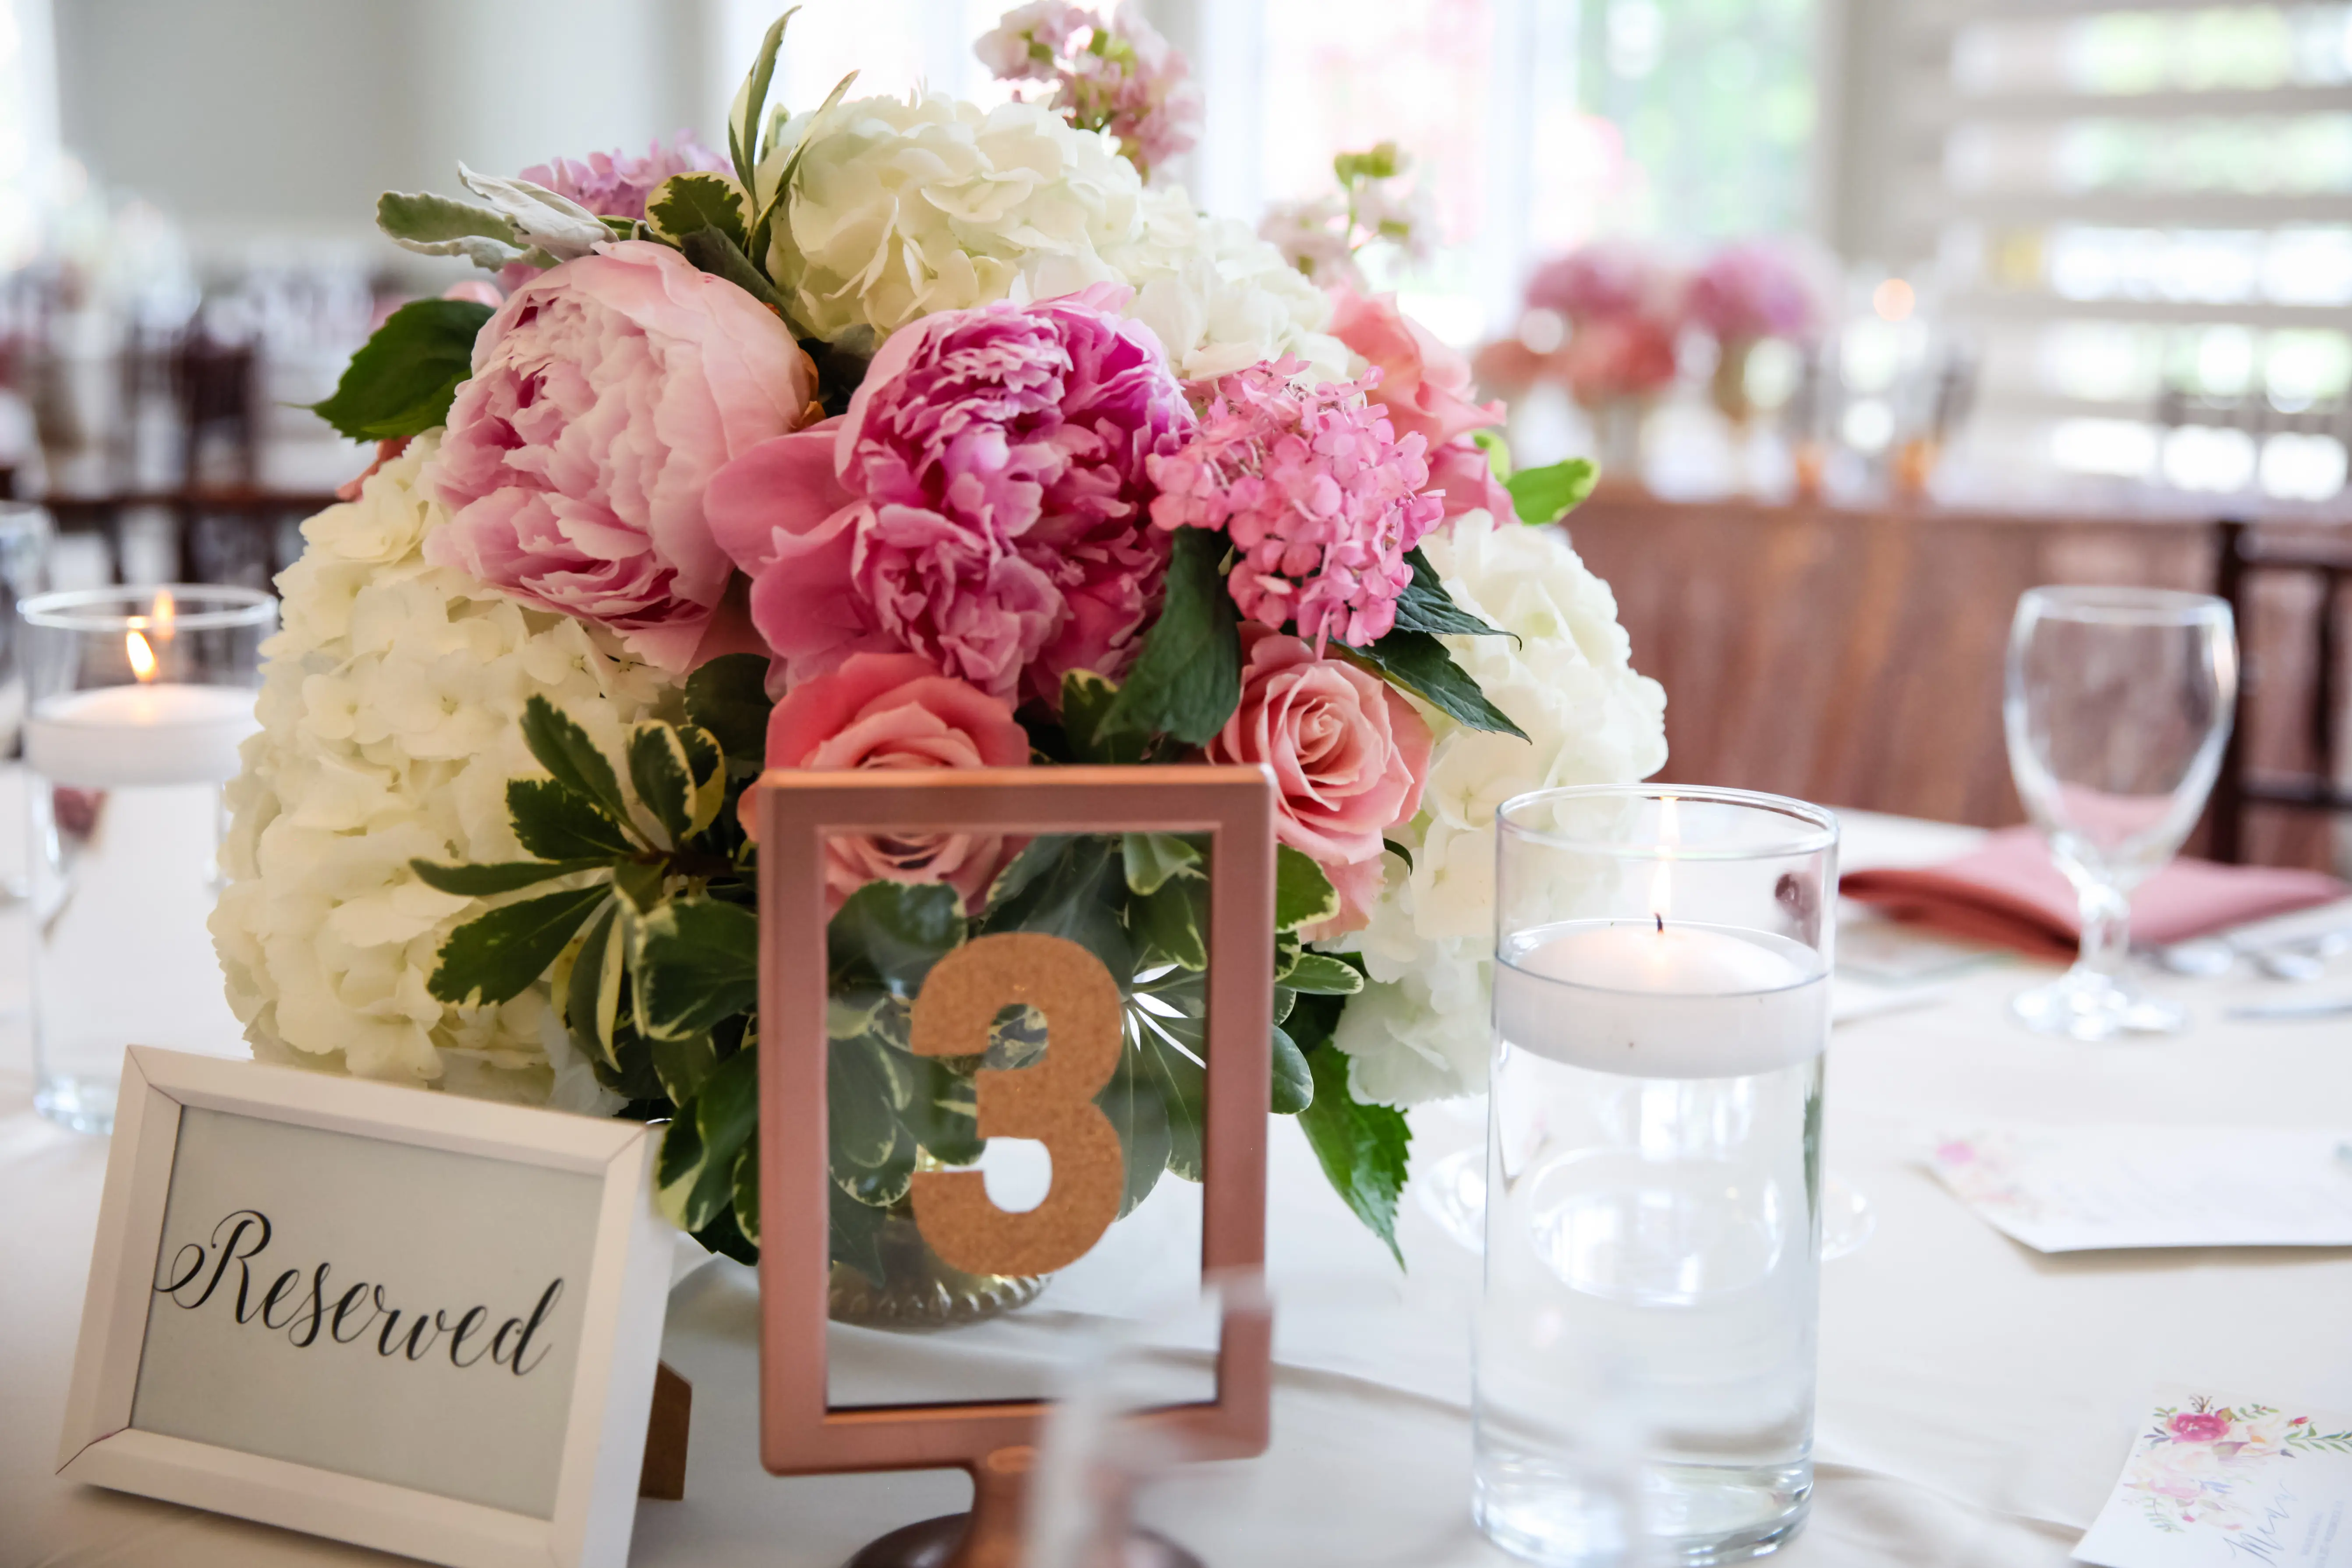 Reserved wedding table